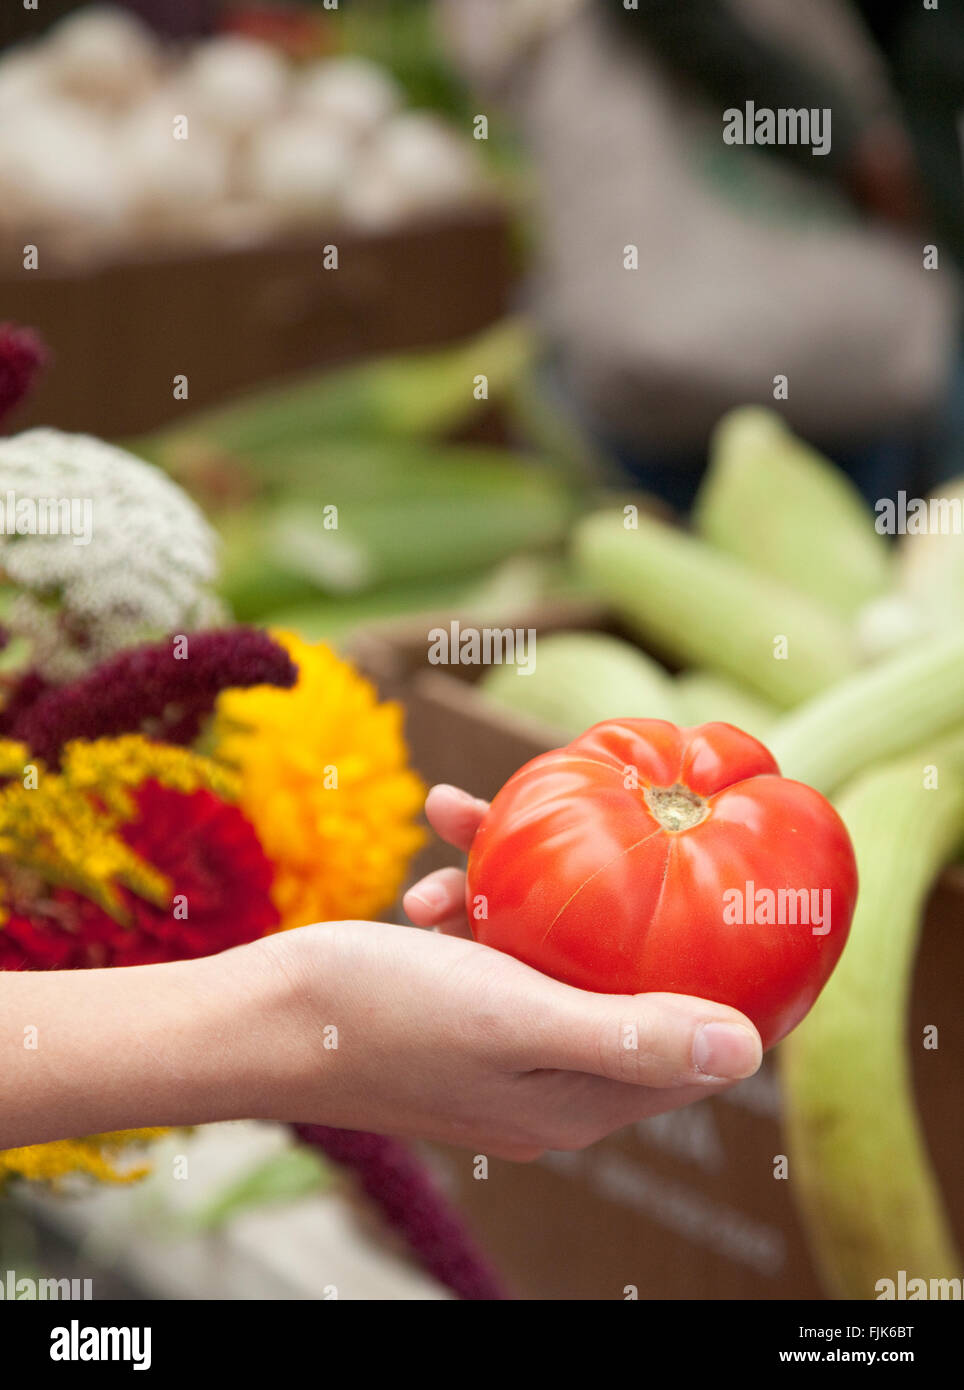 Close-up of woman's hand holding a ripe tomato at an outdoor farmers market. People shopping for fresh, organic, healthy, local produce food. Stock Photo